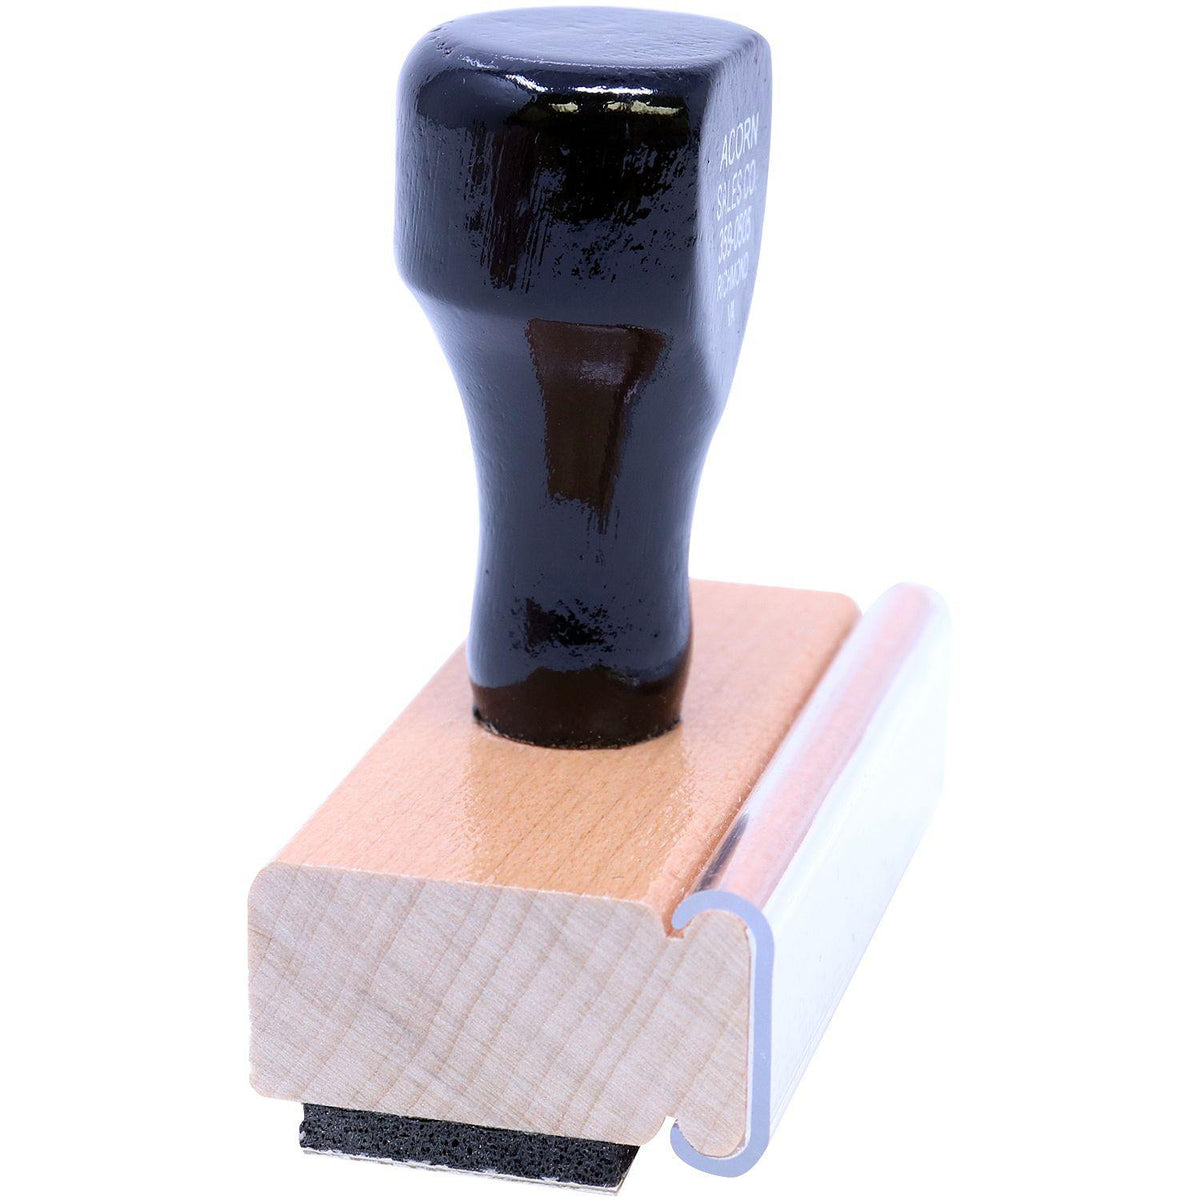 Side View of Facturado Rubber Stamp at an Angle